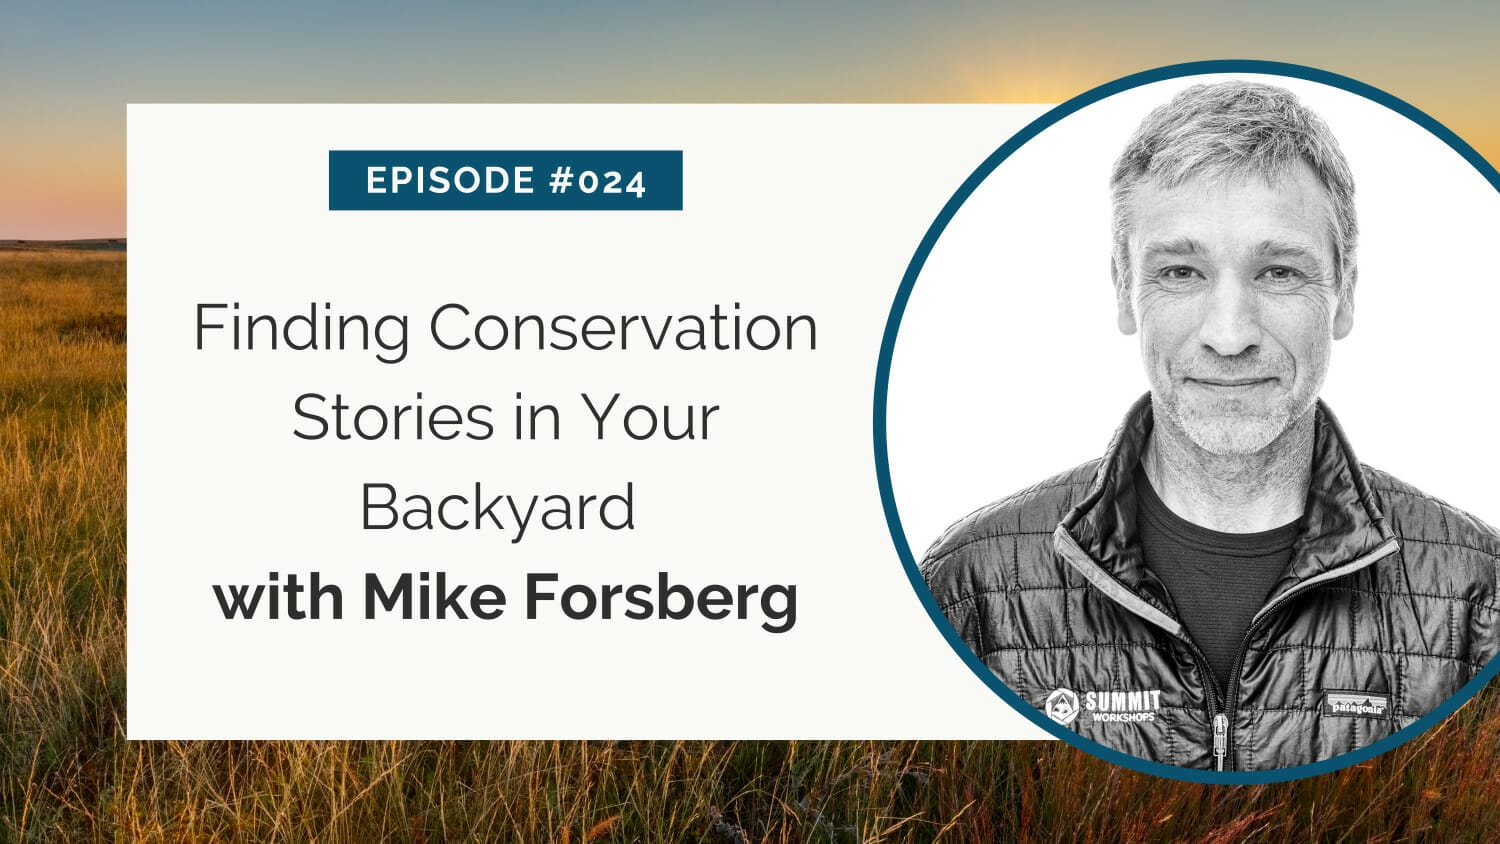 Finding Conservation Stories in Your Backyard with Mike Forsberg